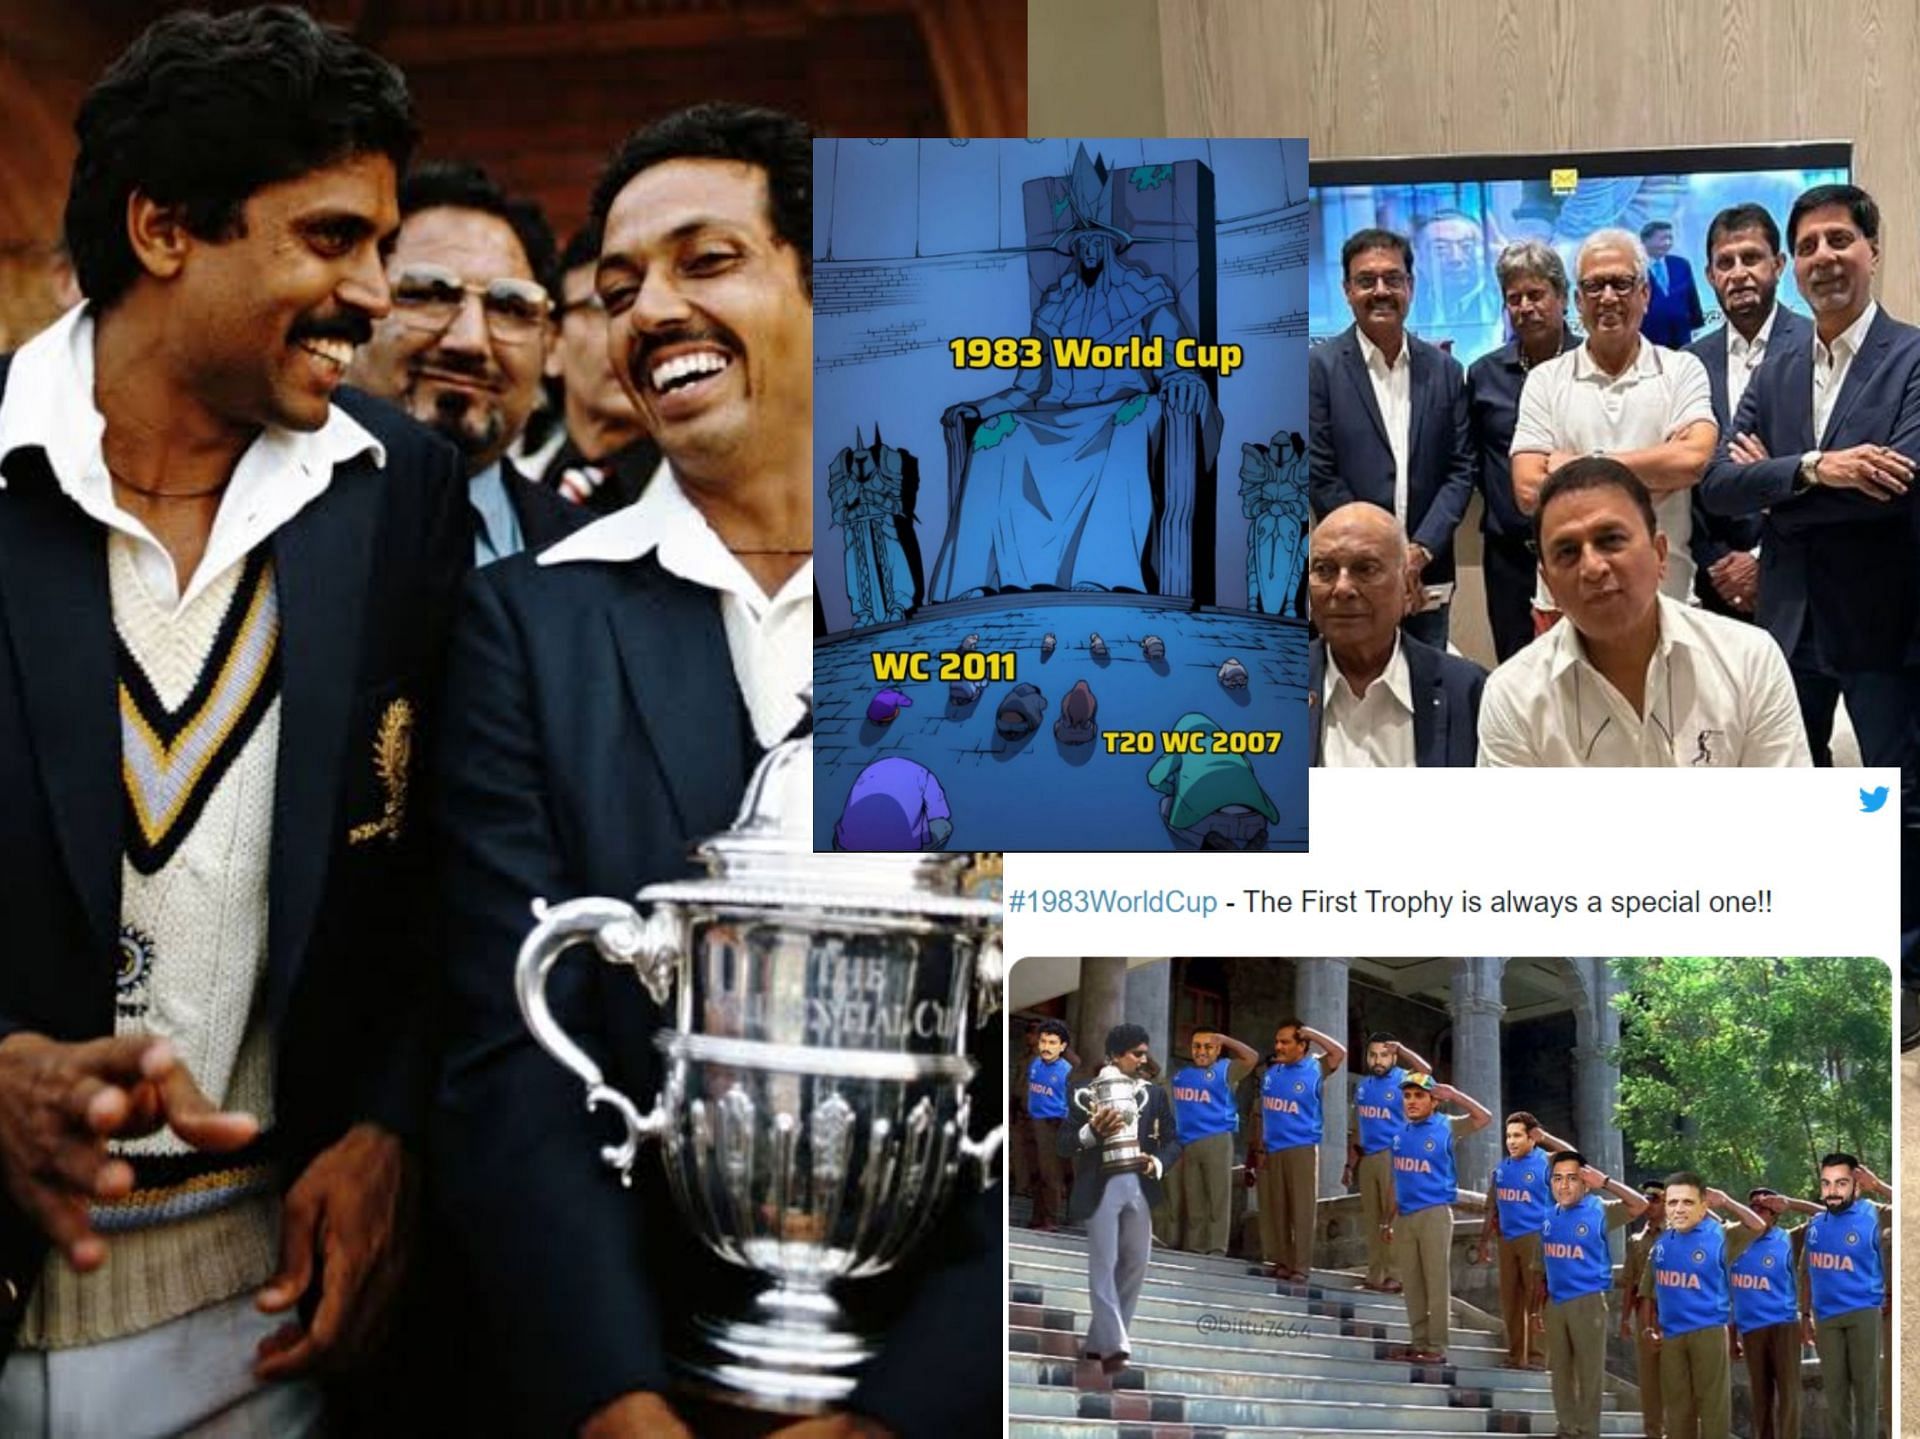 Twitterati hails Indian team which won the ODI World Cup in 1983. 